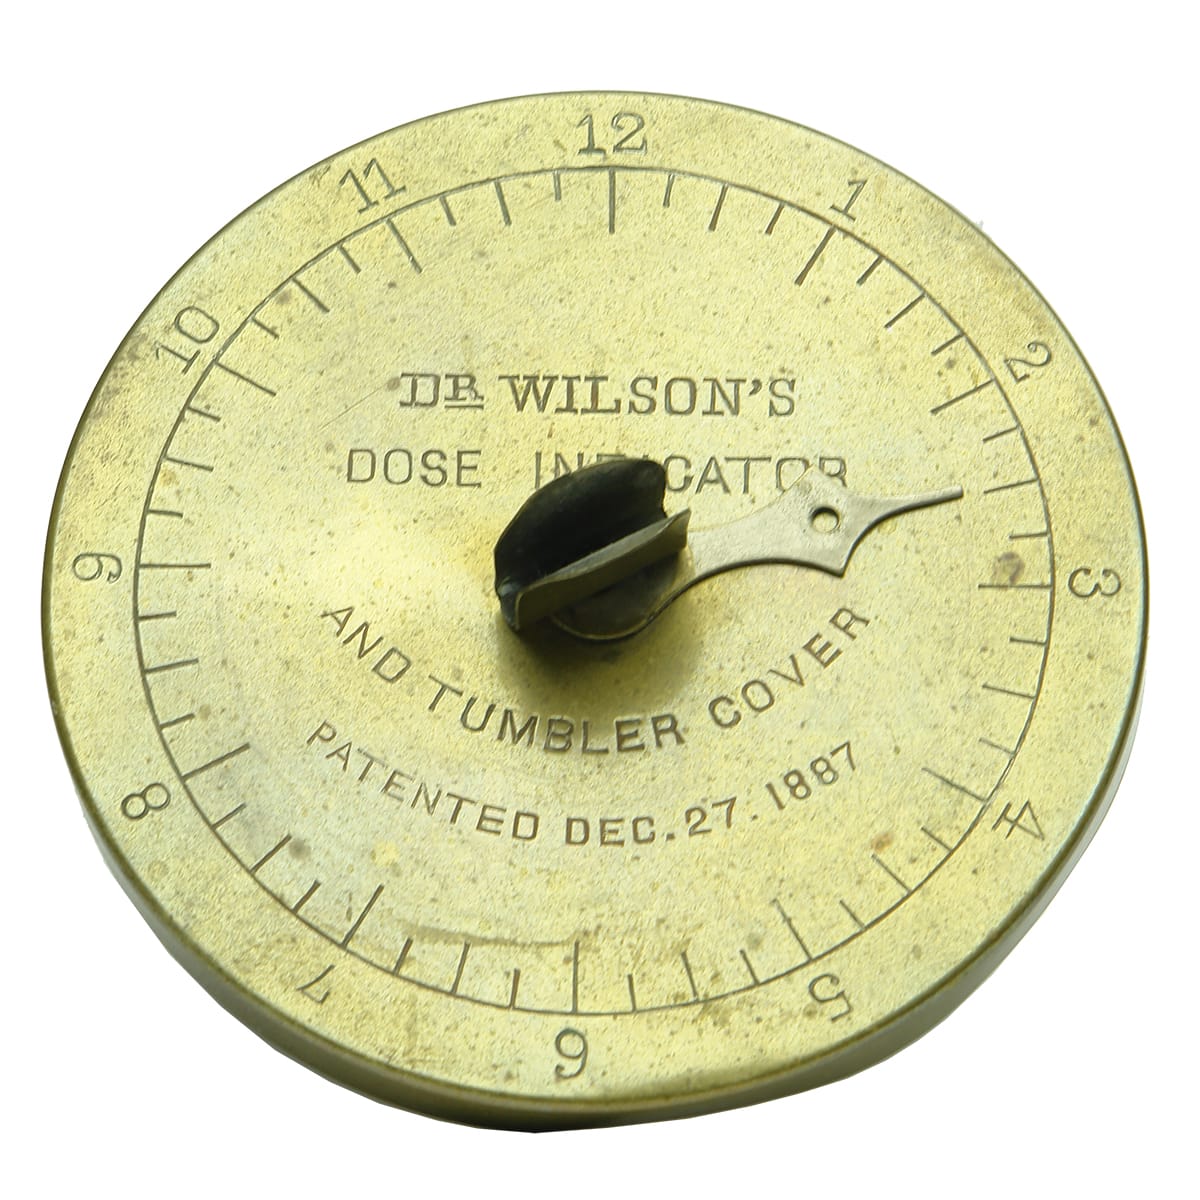 Brass Cap. Dr Wilson's Dose Indicator and Tumbler Cover.